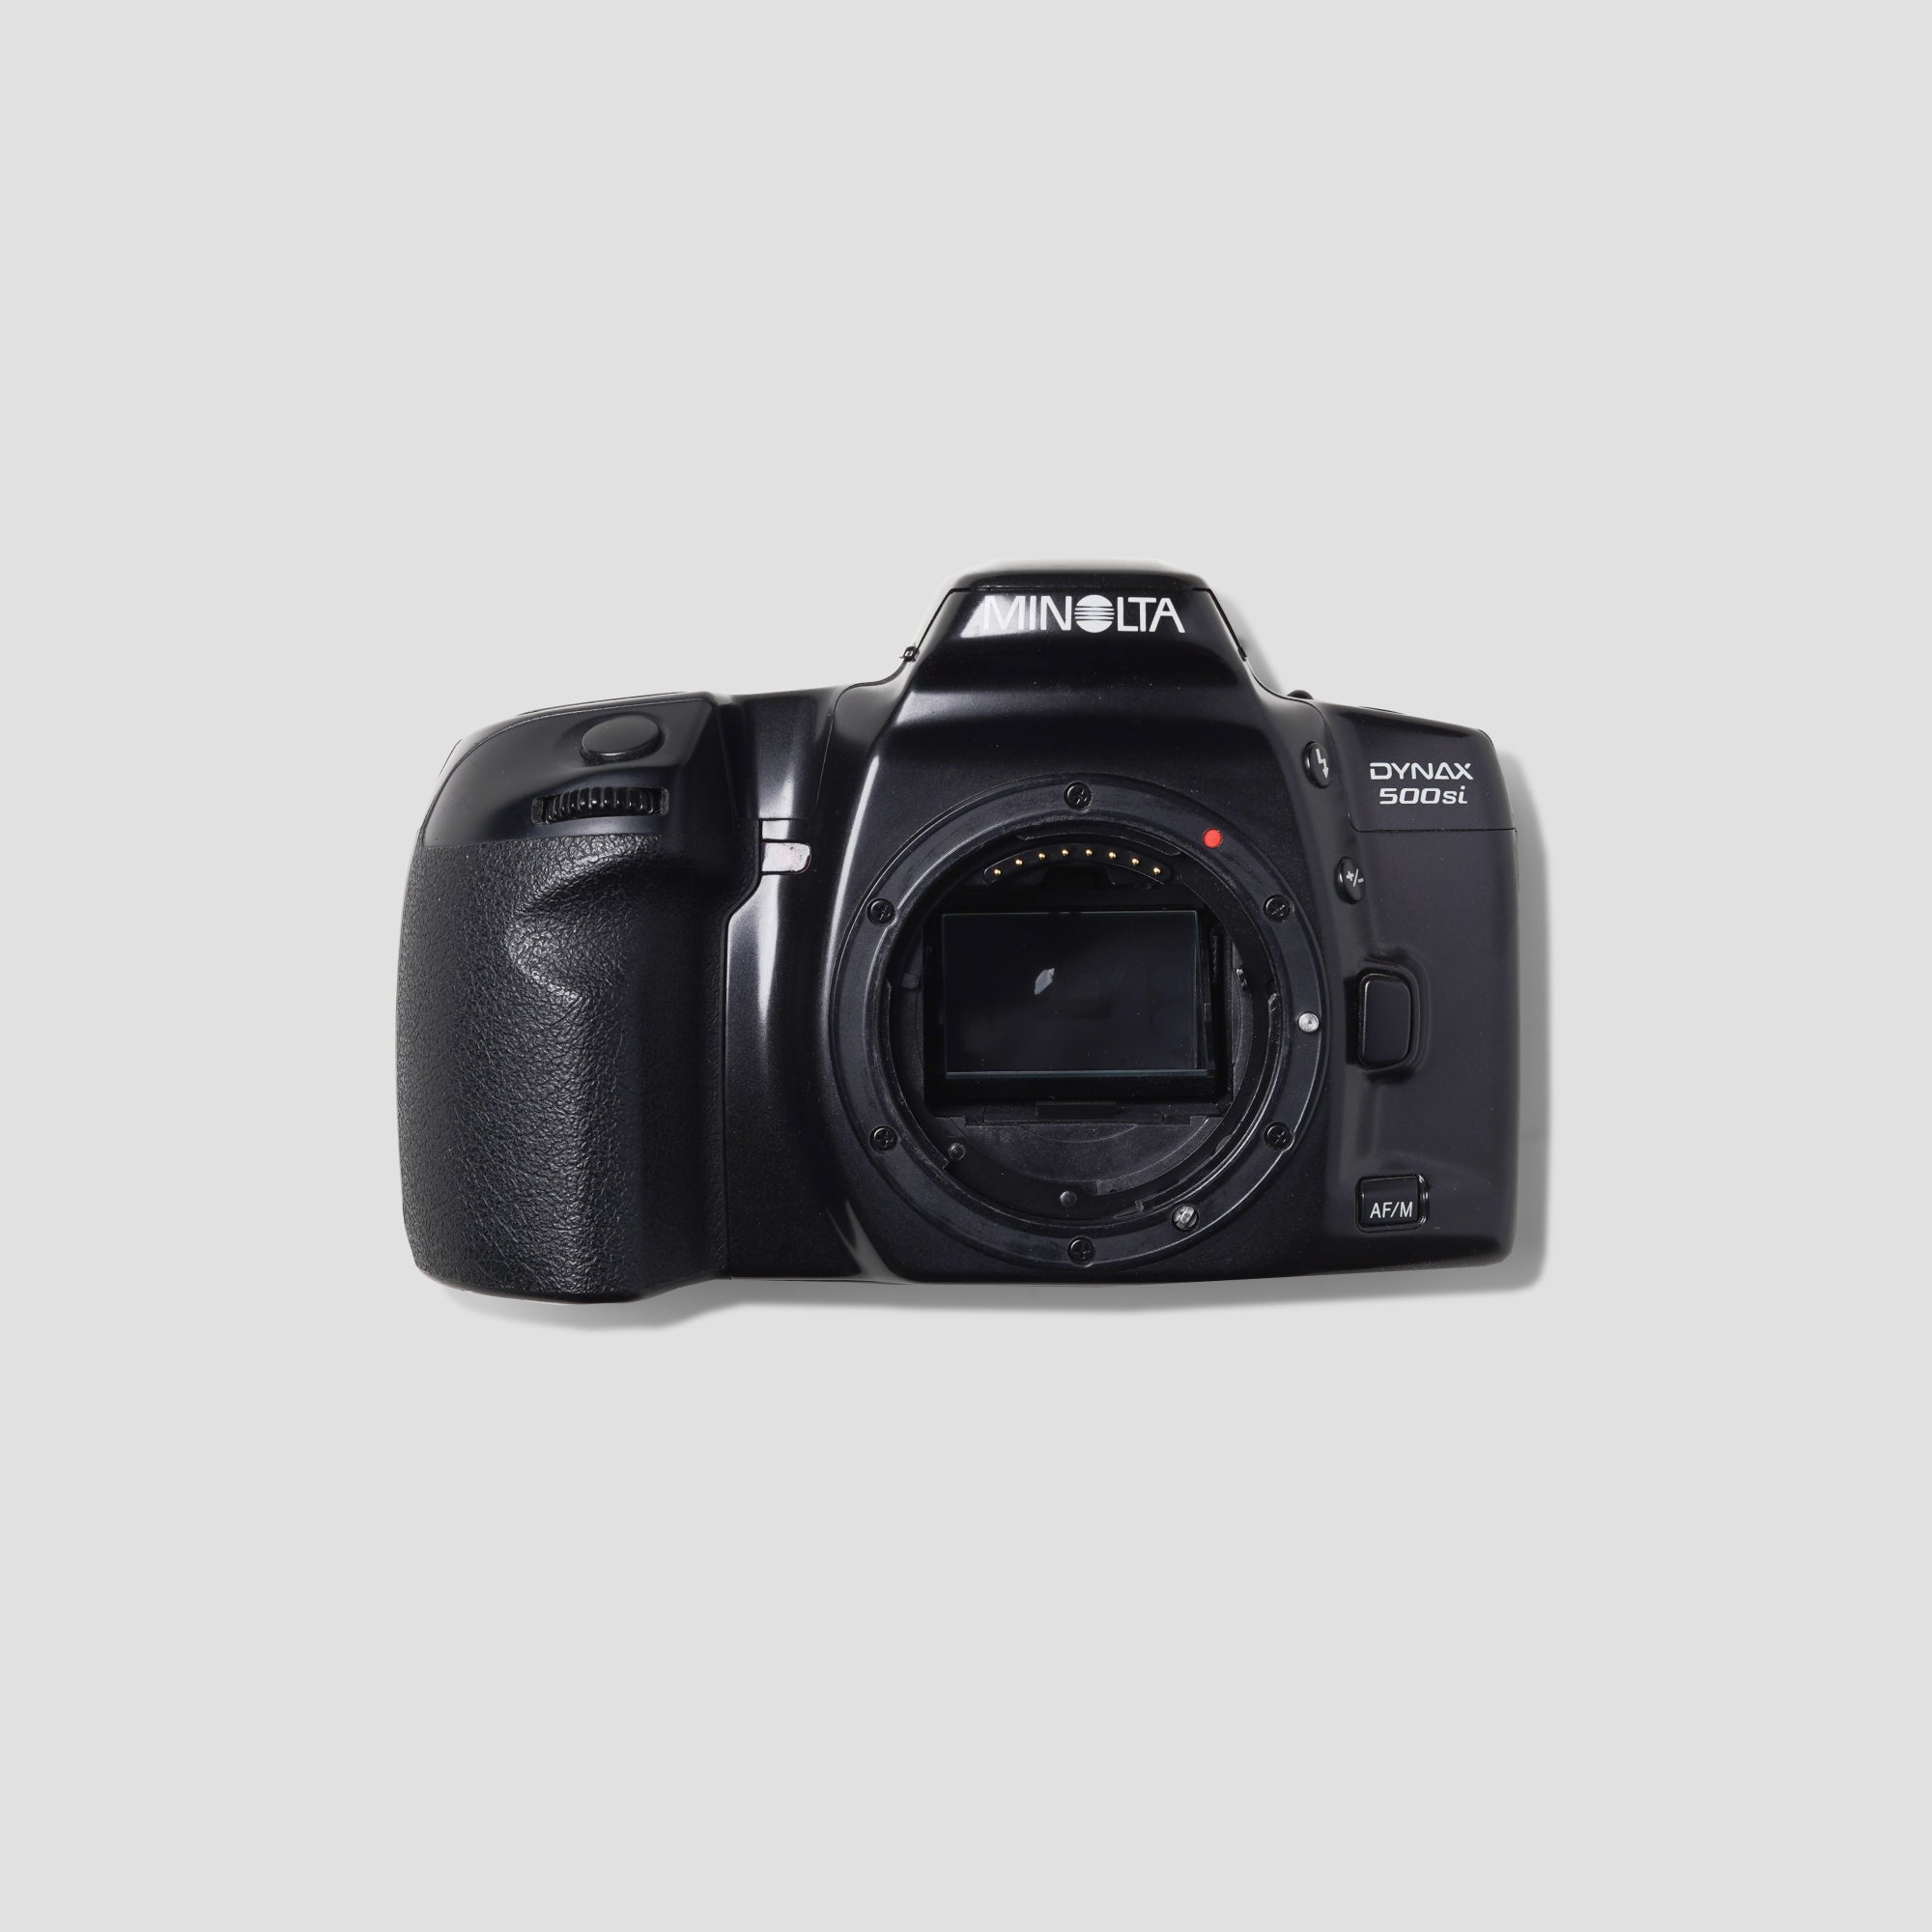 Buy Minolta Dynax 500si now at Analogue Amsterdam